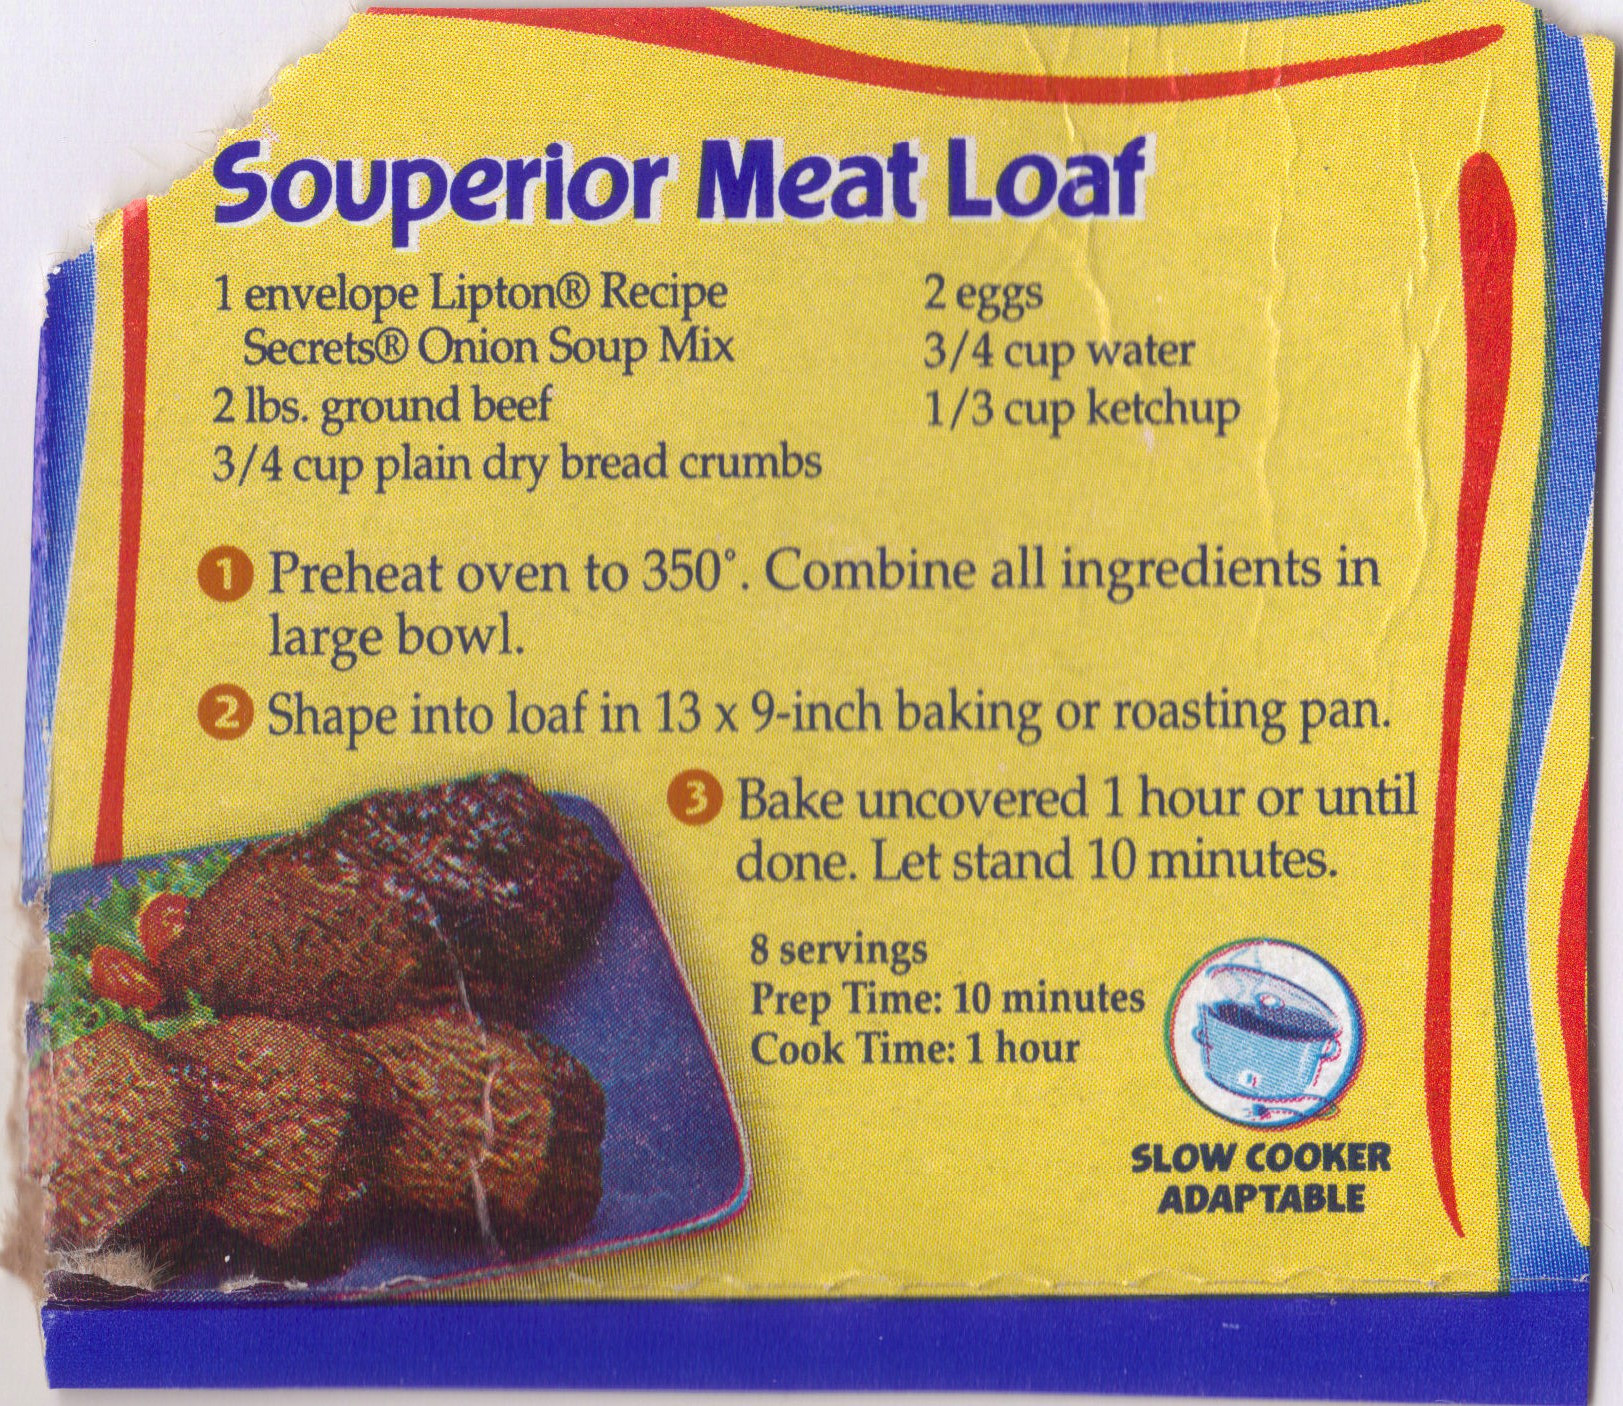 Lipton Onion Soup Meatloaf Recipe
 meatloaf with onion soup mix and evaporated milk